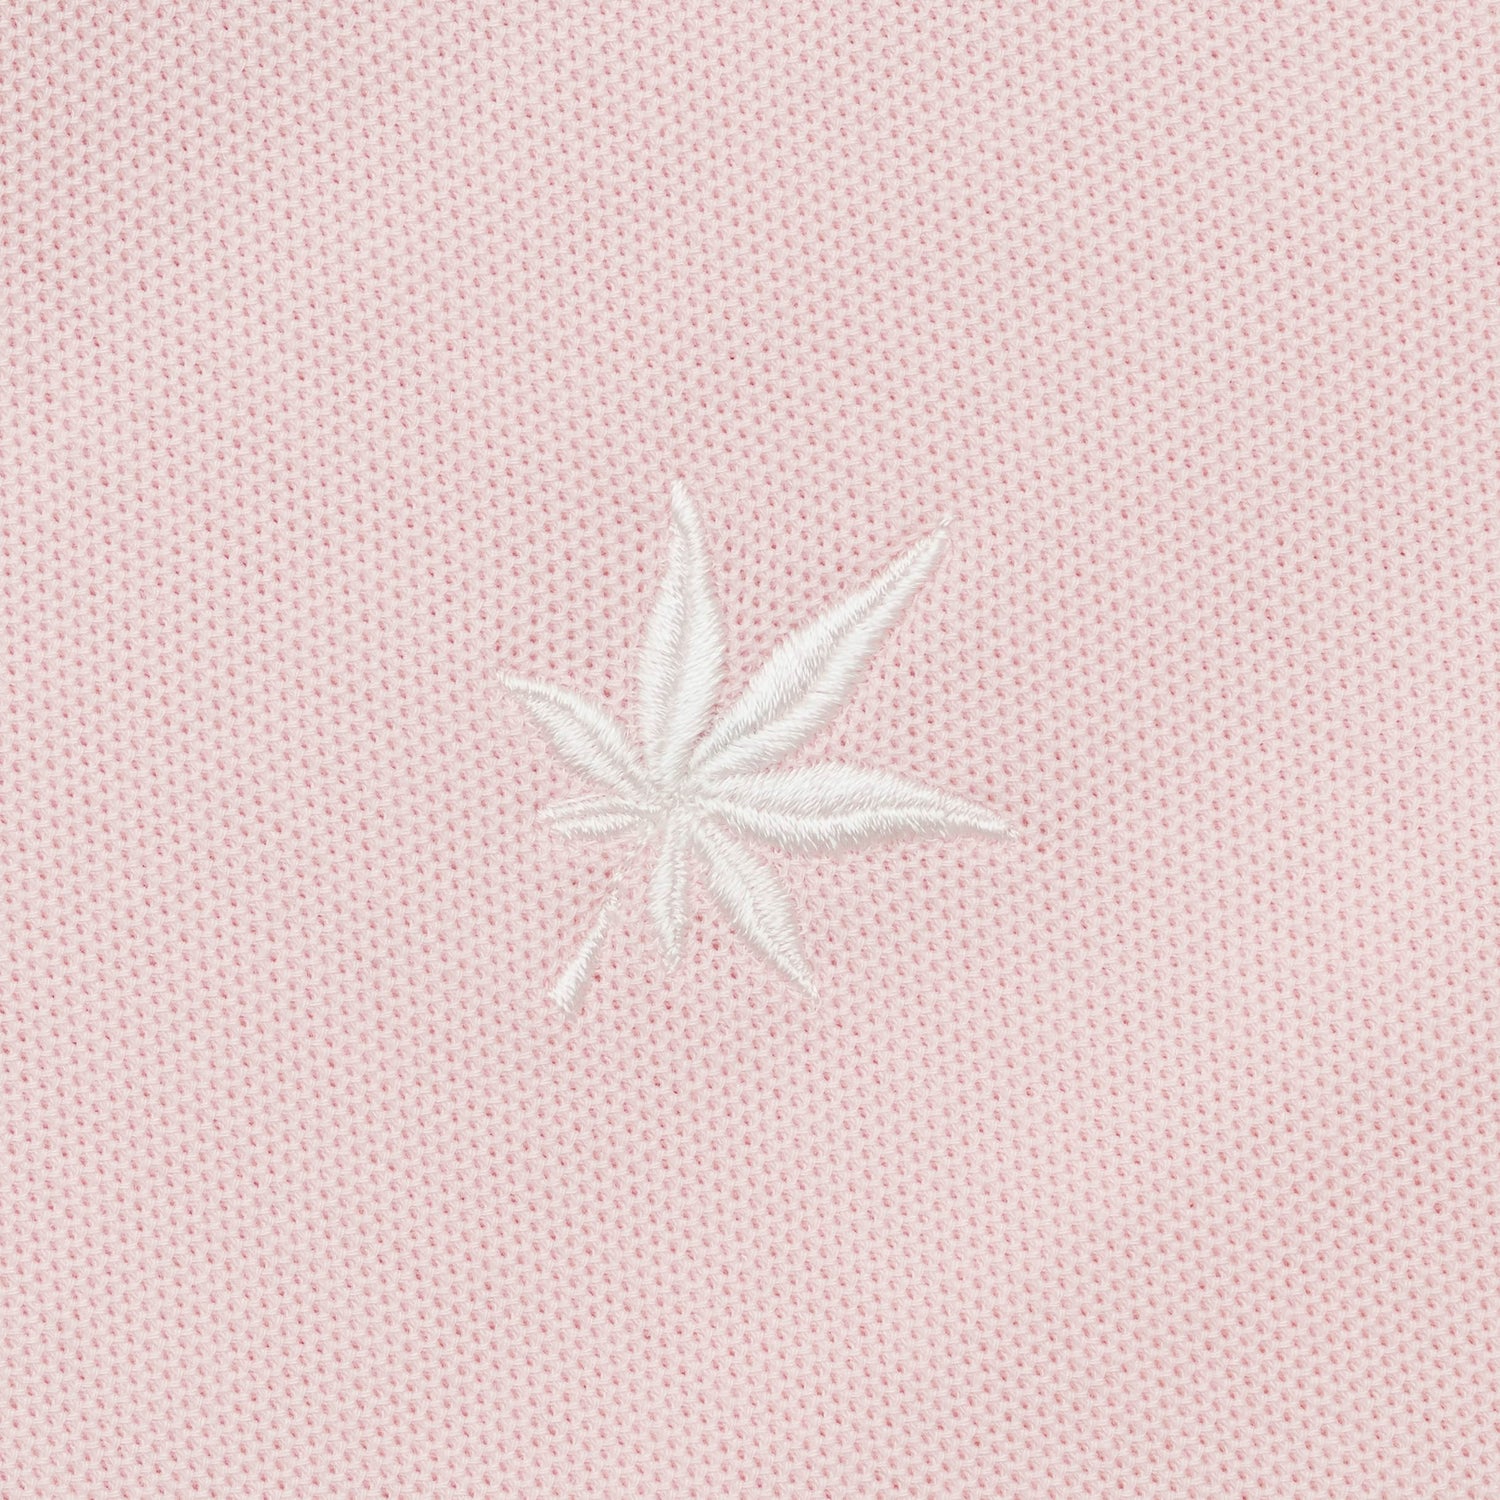 White embroidered leaf.